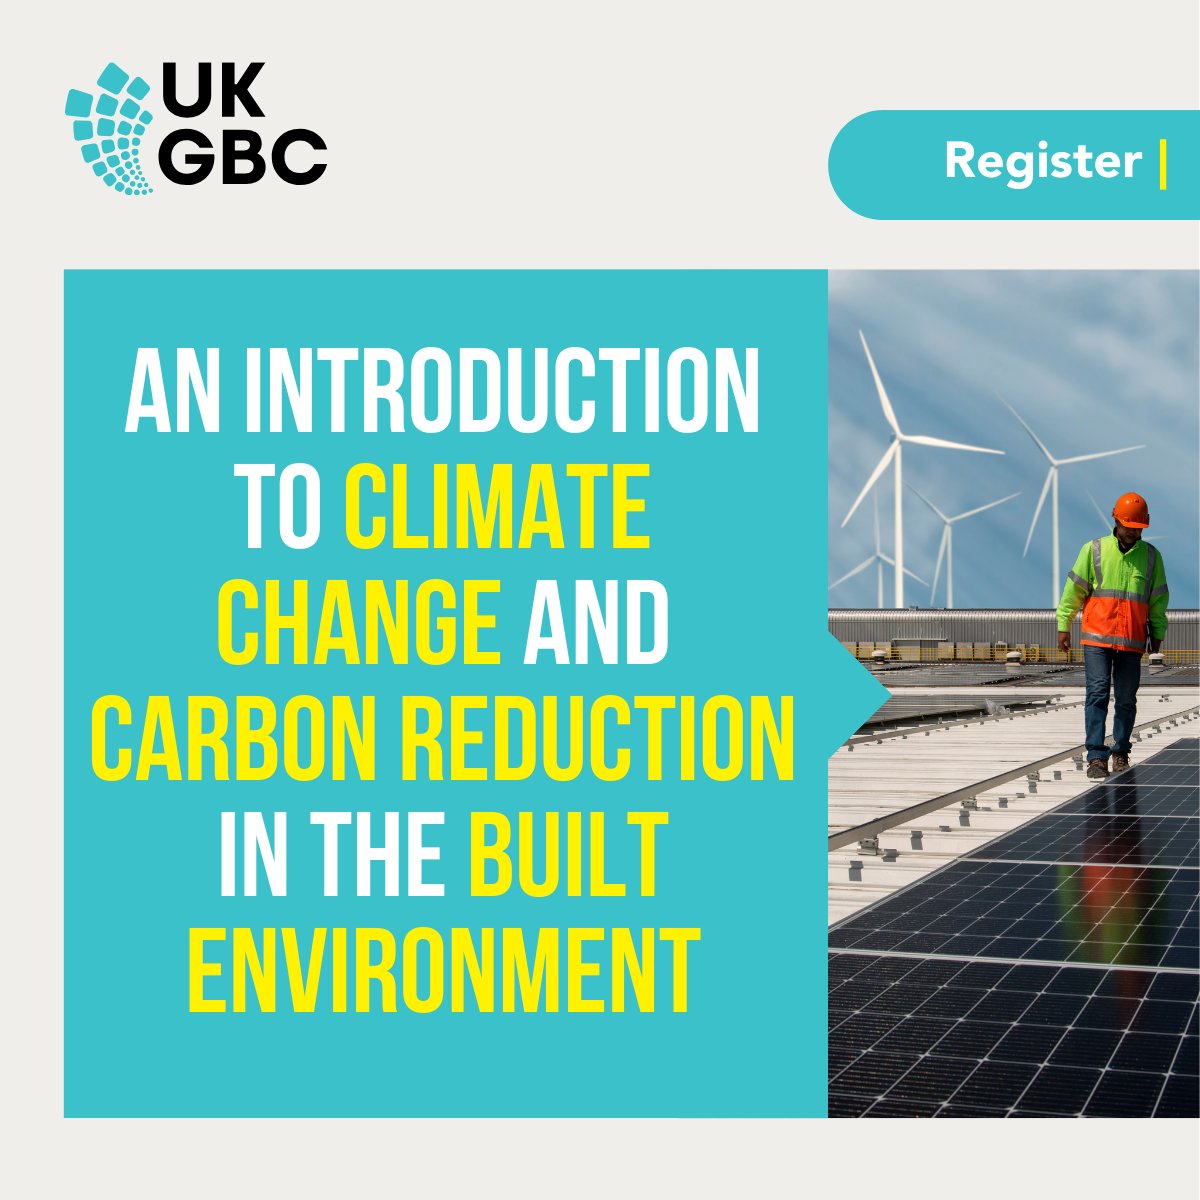 📣 UKGBC launches new introductory course on climate change and low carbon design in the built environment. The four-week course, hosted on @FutureLearn, introduces #climatechange and the different approaches to reduce #carbon in buildings globally. 🖱️ ukgbc.org/events/an-intr…